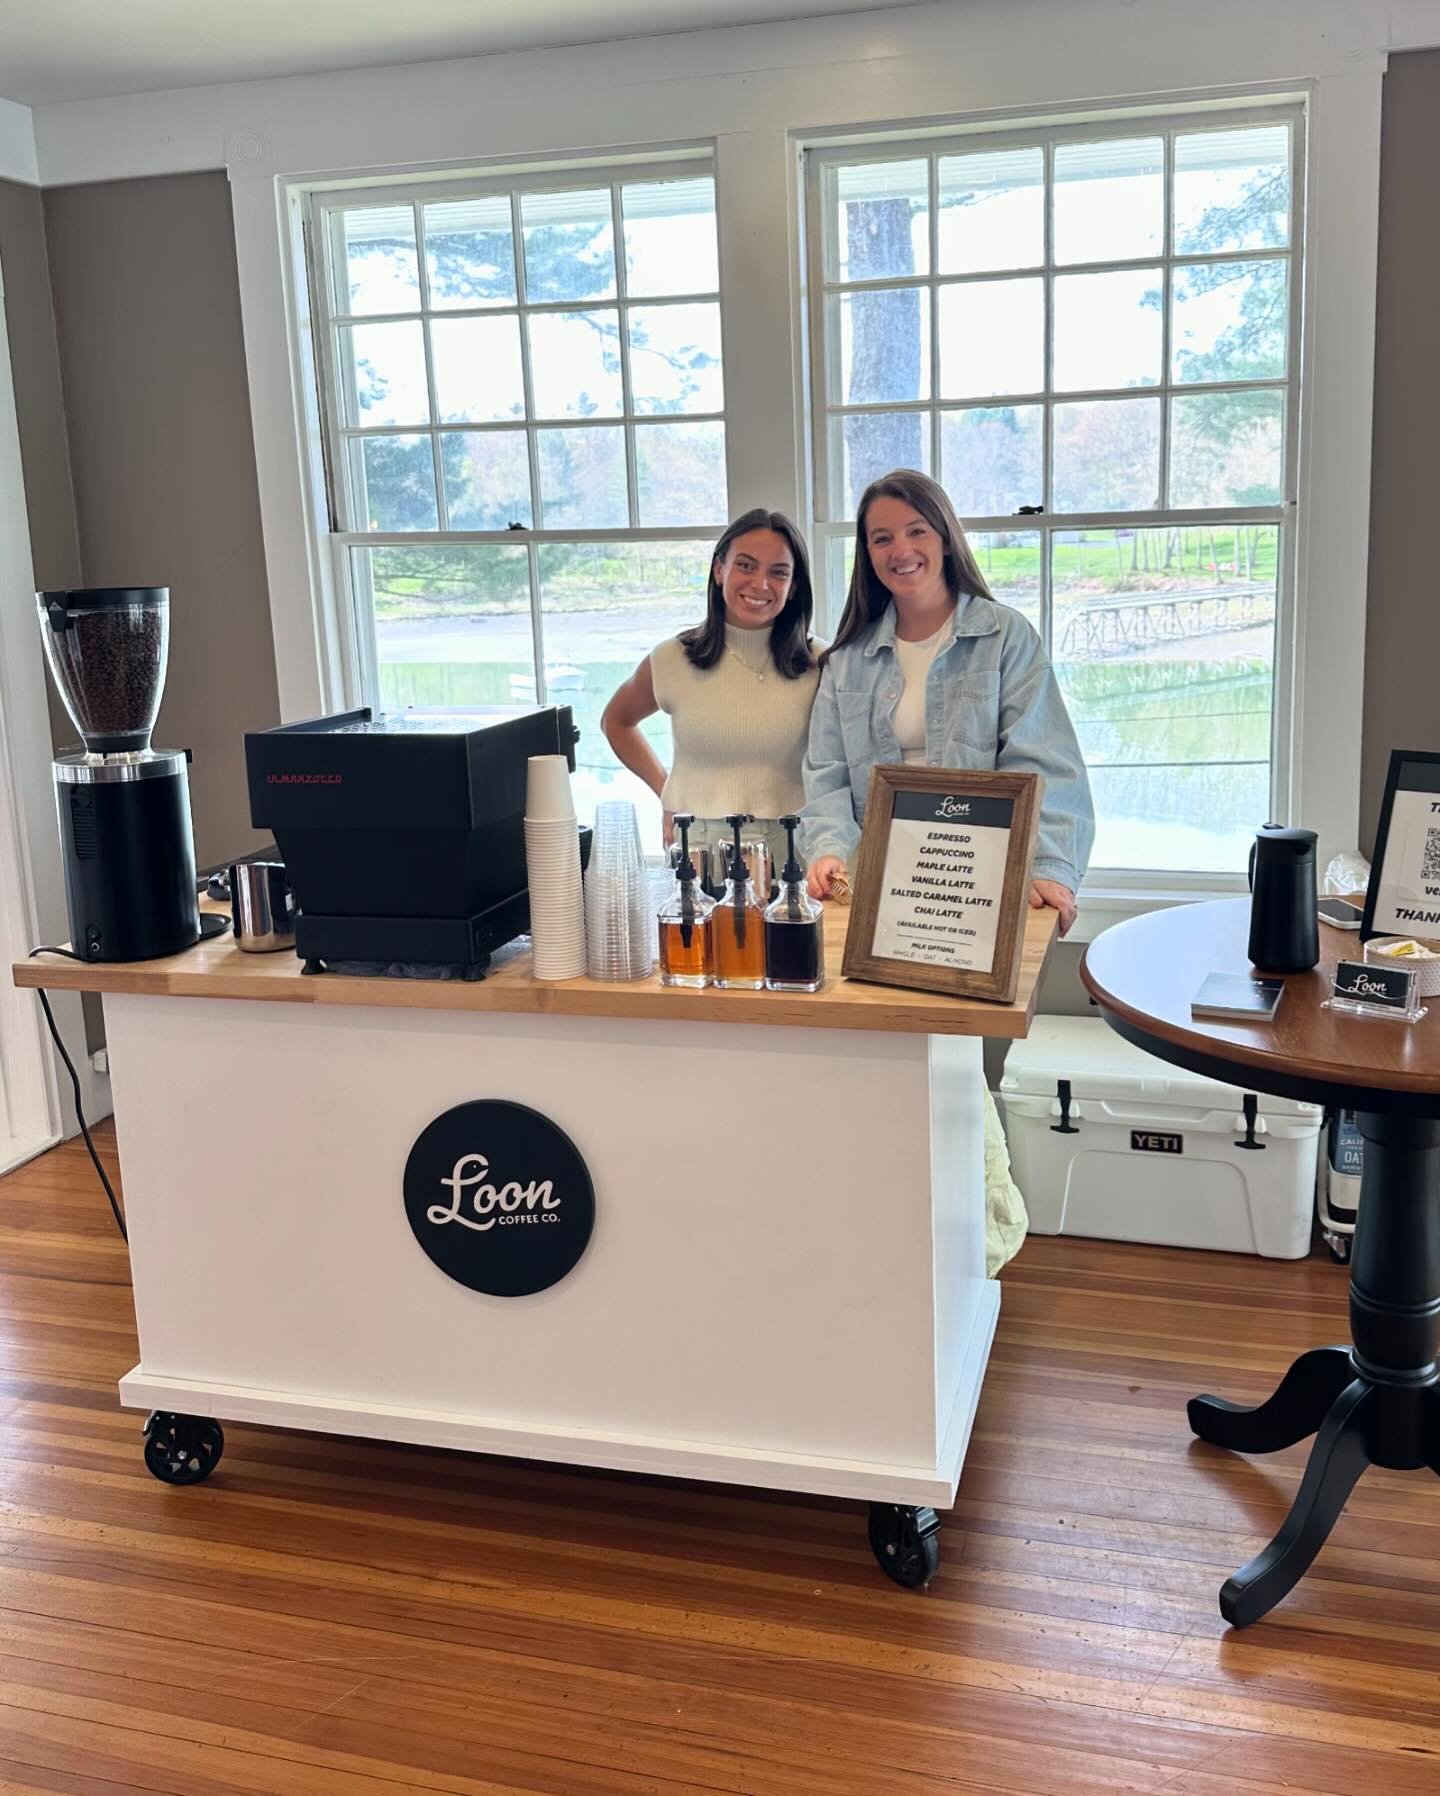 Great week serving two deserving groups, nurses and mothers!

Thanks for having us out @portsmouthregionalhospital and @yorkgolfandtennisclub! Hopefully we&rsquo;ll be back soon.

#mothersday #nursesweek #grinding #beanteam #coffeebrand #coffeecart #